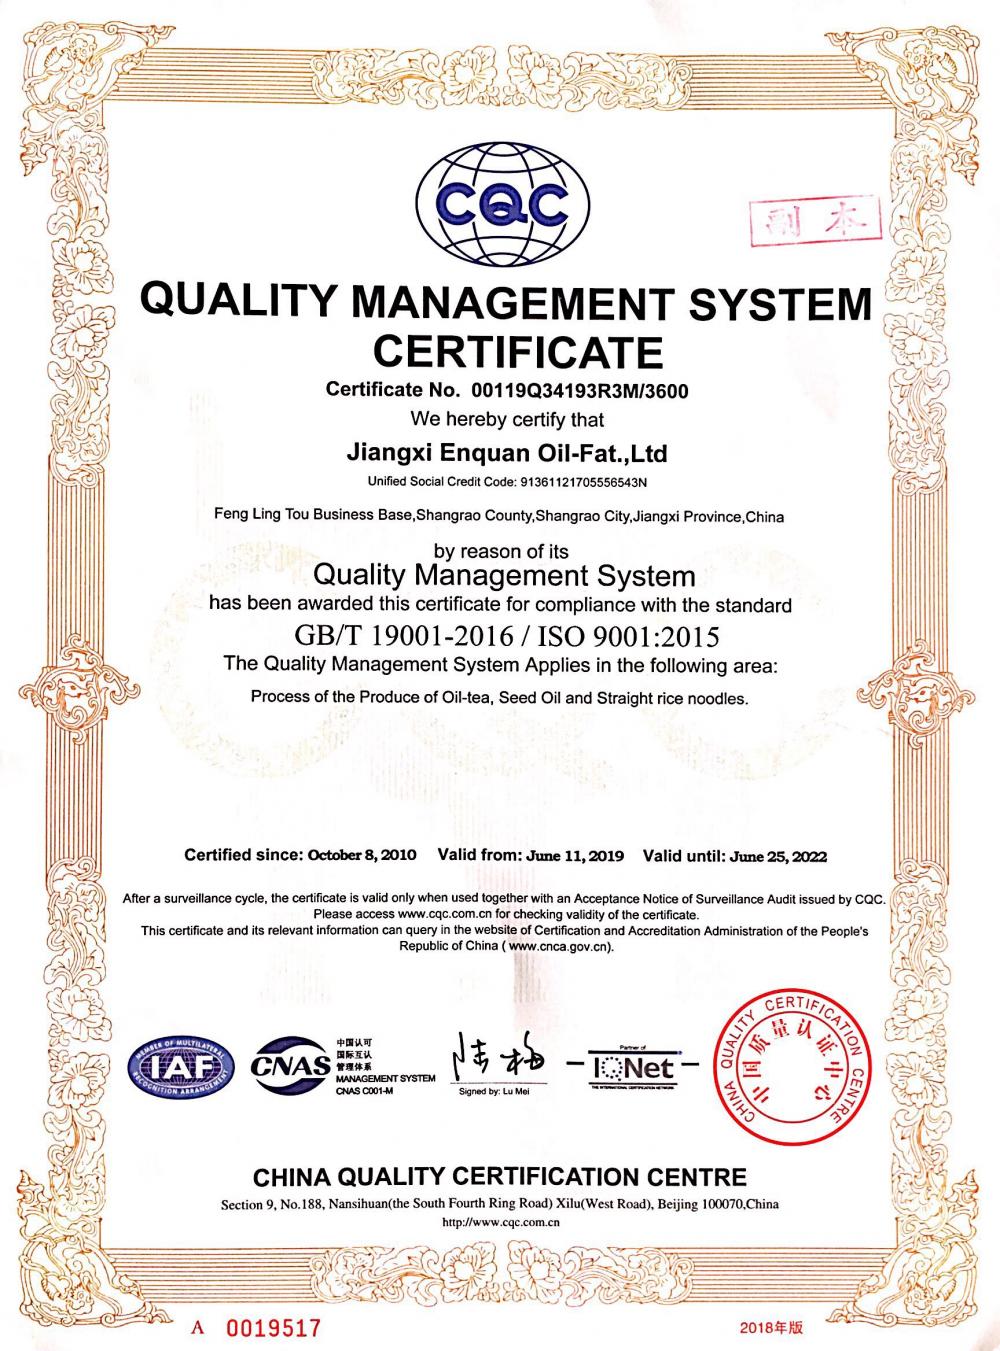 QUALITY MANAGEMENT CERTIFICATE